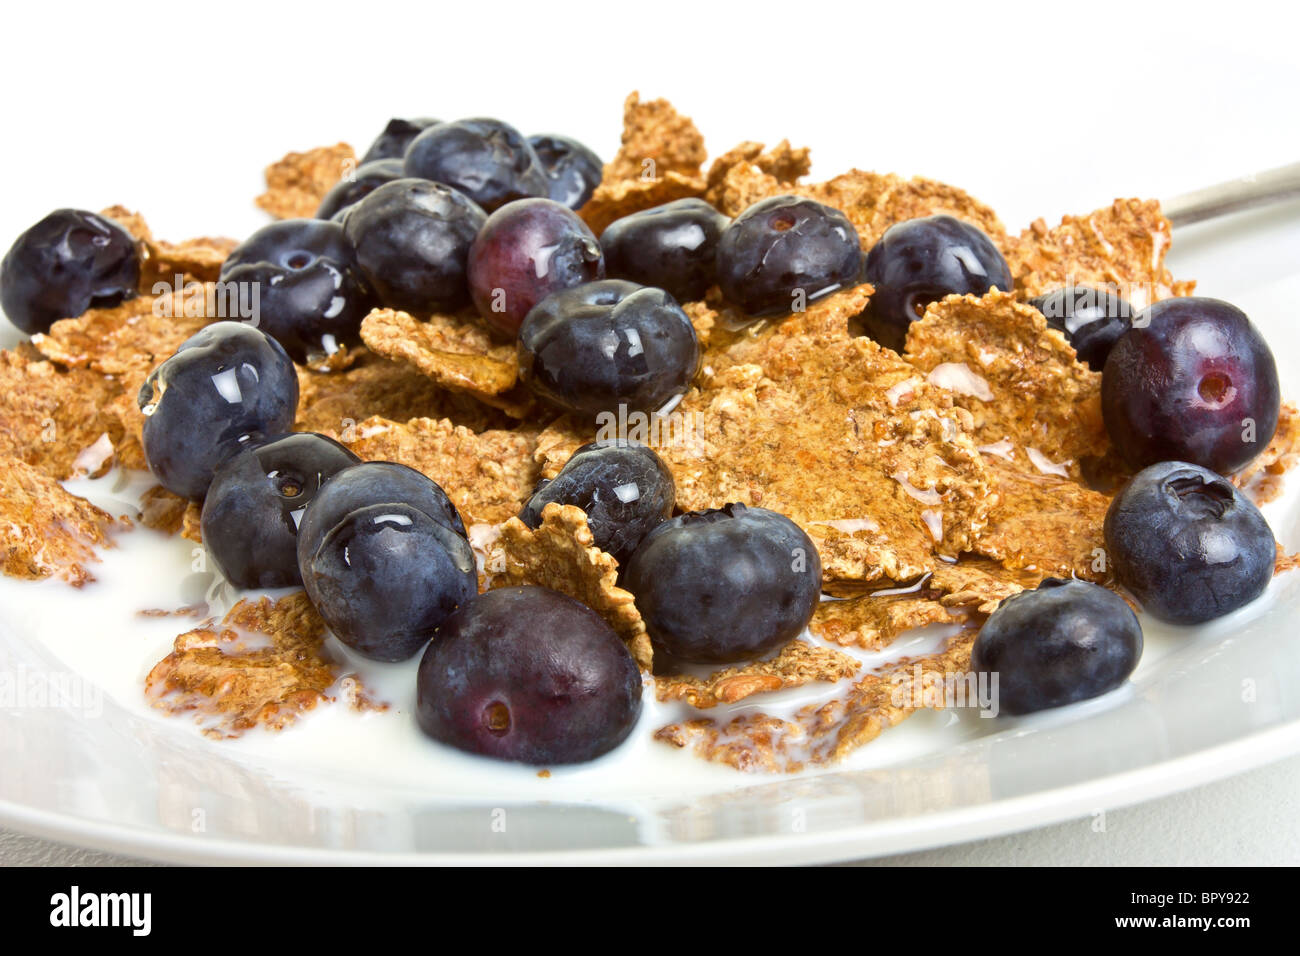 Breakfast Cereal Medley of bran flakes, blueberries, honey and milk. Stock Photo